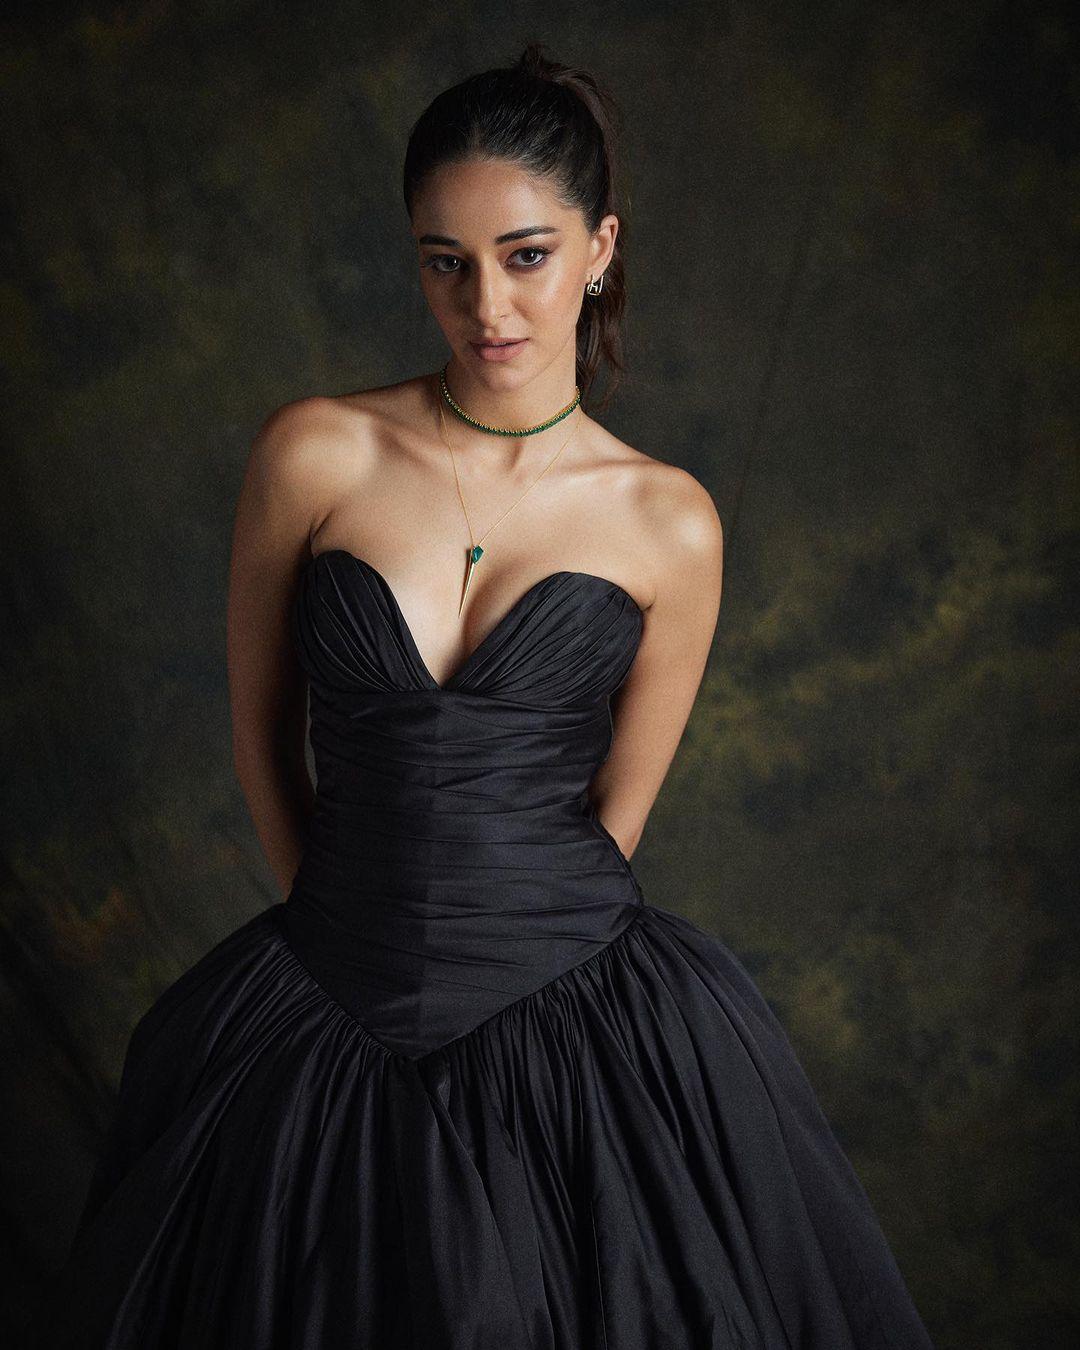 Her elegant black ball gown gives off a vintage luxury vibe.